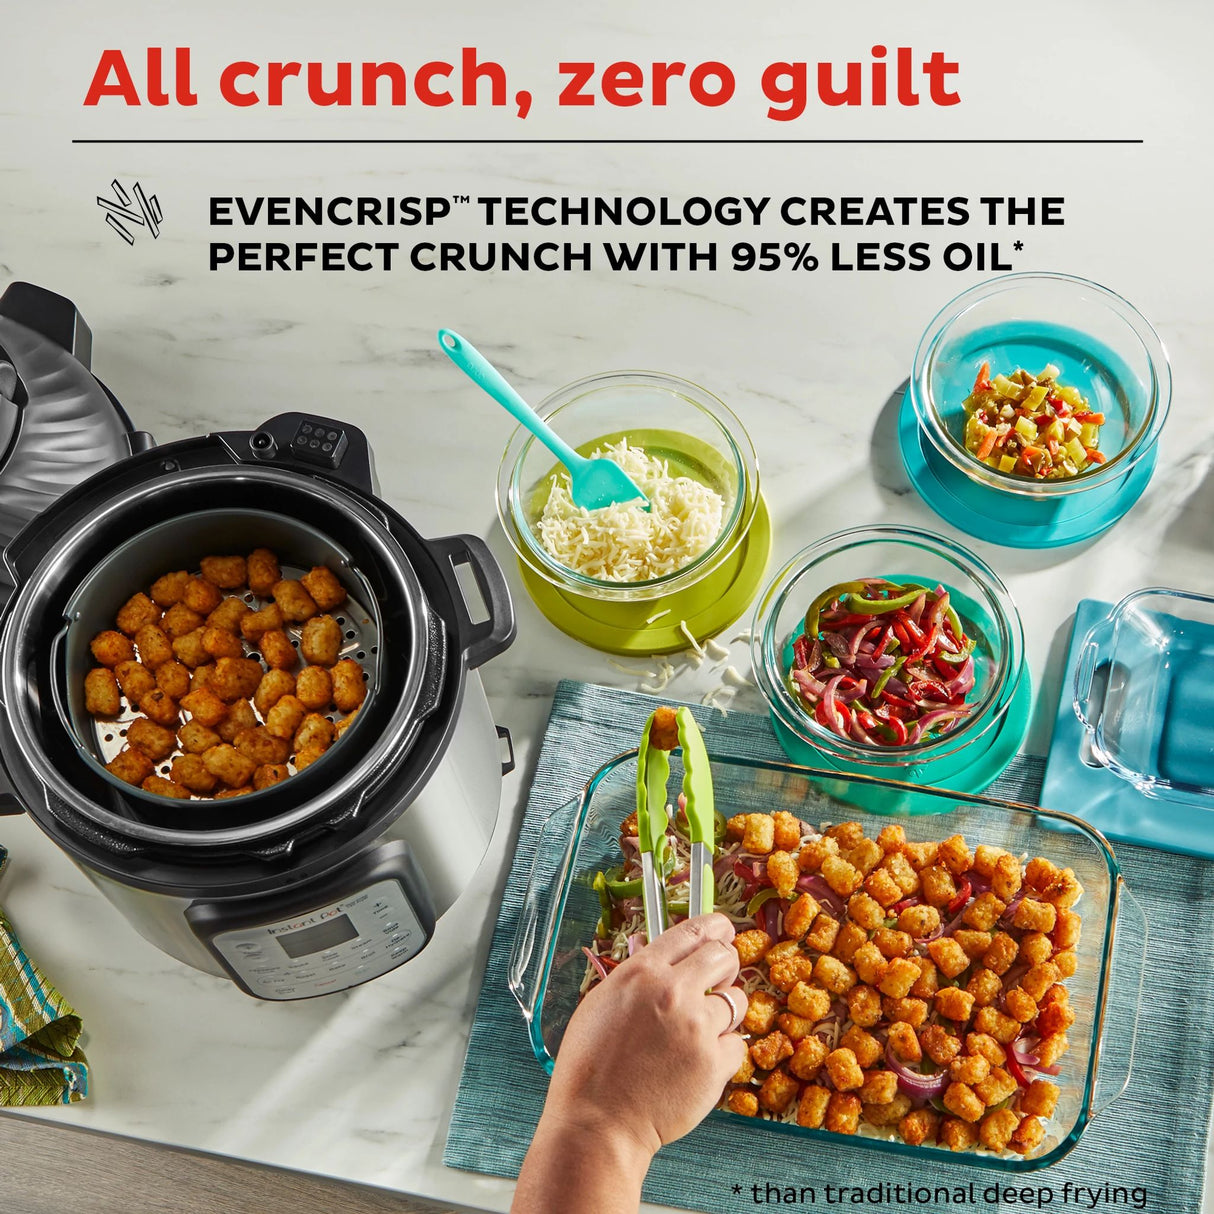  Instant Pot Duo Crisp and Air Fryer 8-quart Multi-Use Pressure Cooker with text All crunch, zero guilt